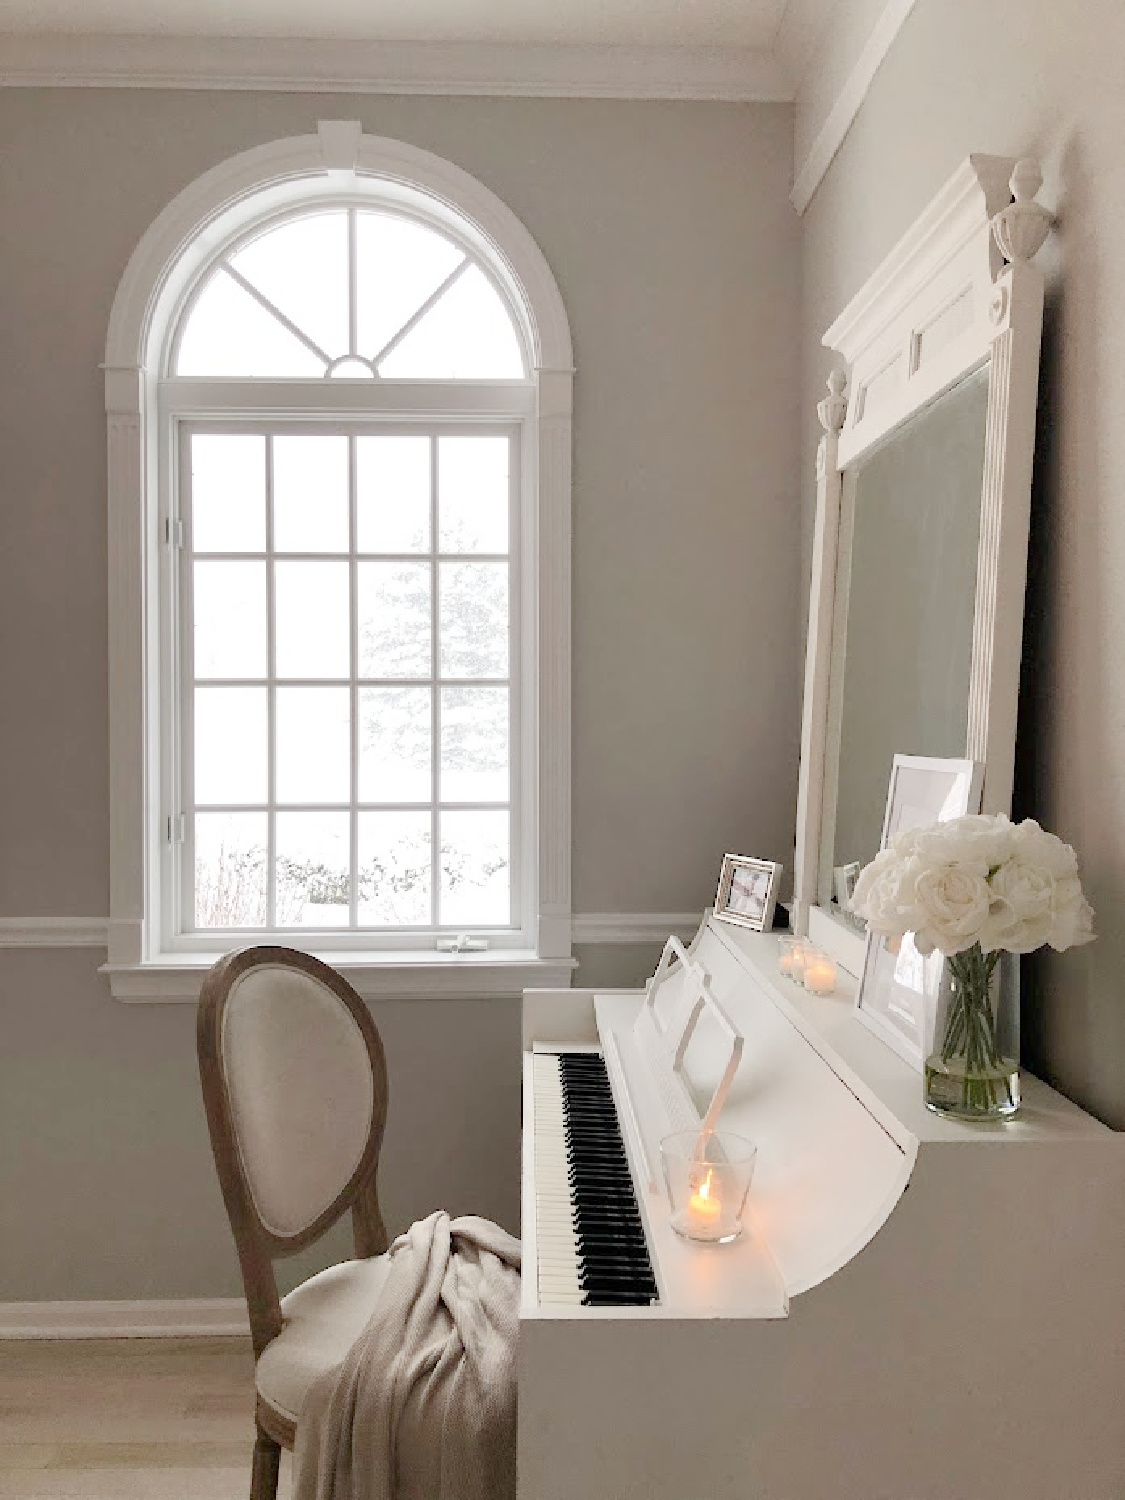 Serene winter vignette with my white piano as it snows - Hello Lovely Studio. #hellolovelyhome